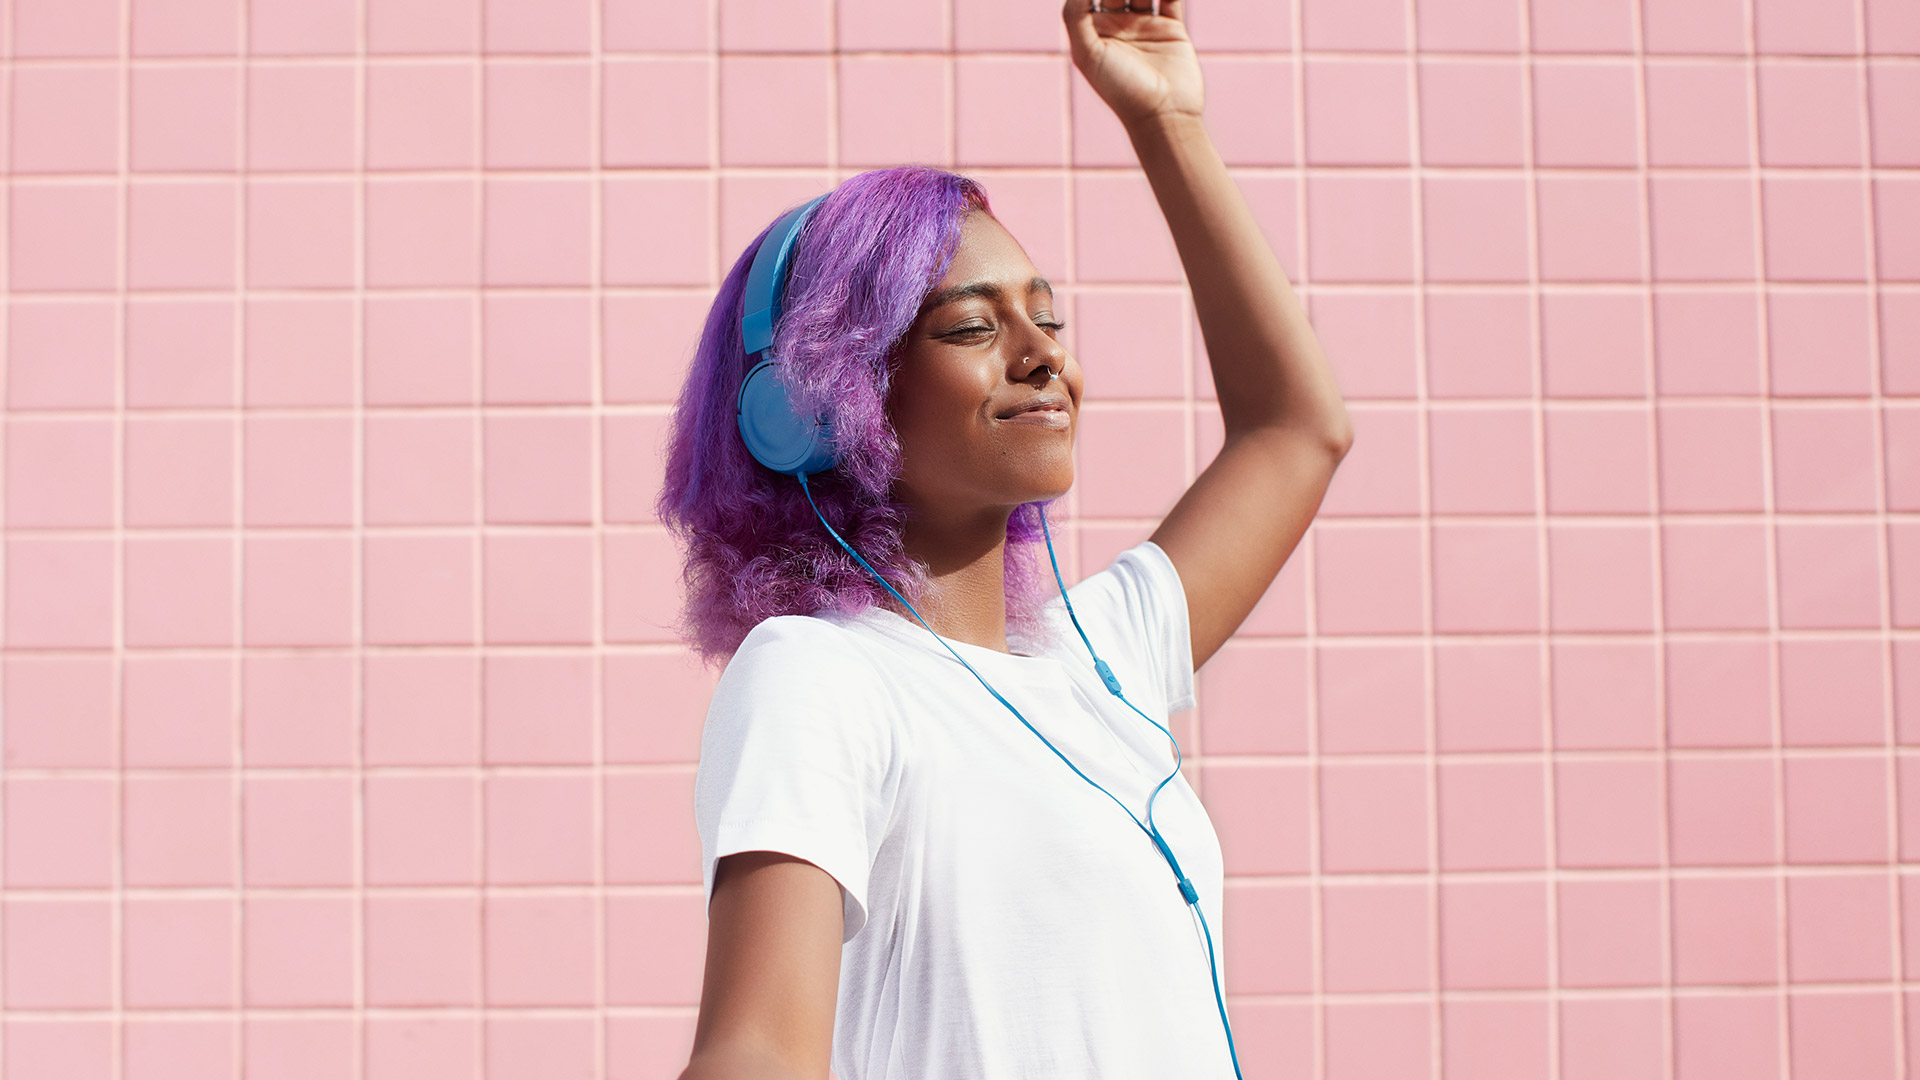 A Spotify listener dancing with headphones on